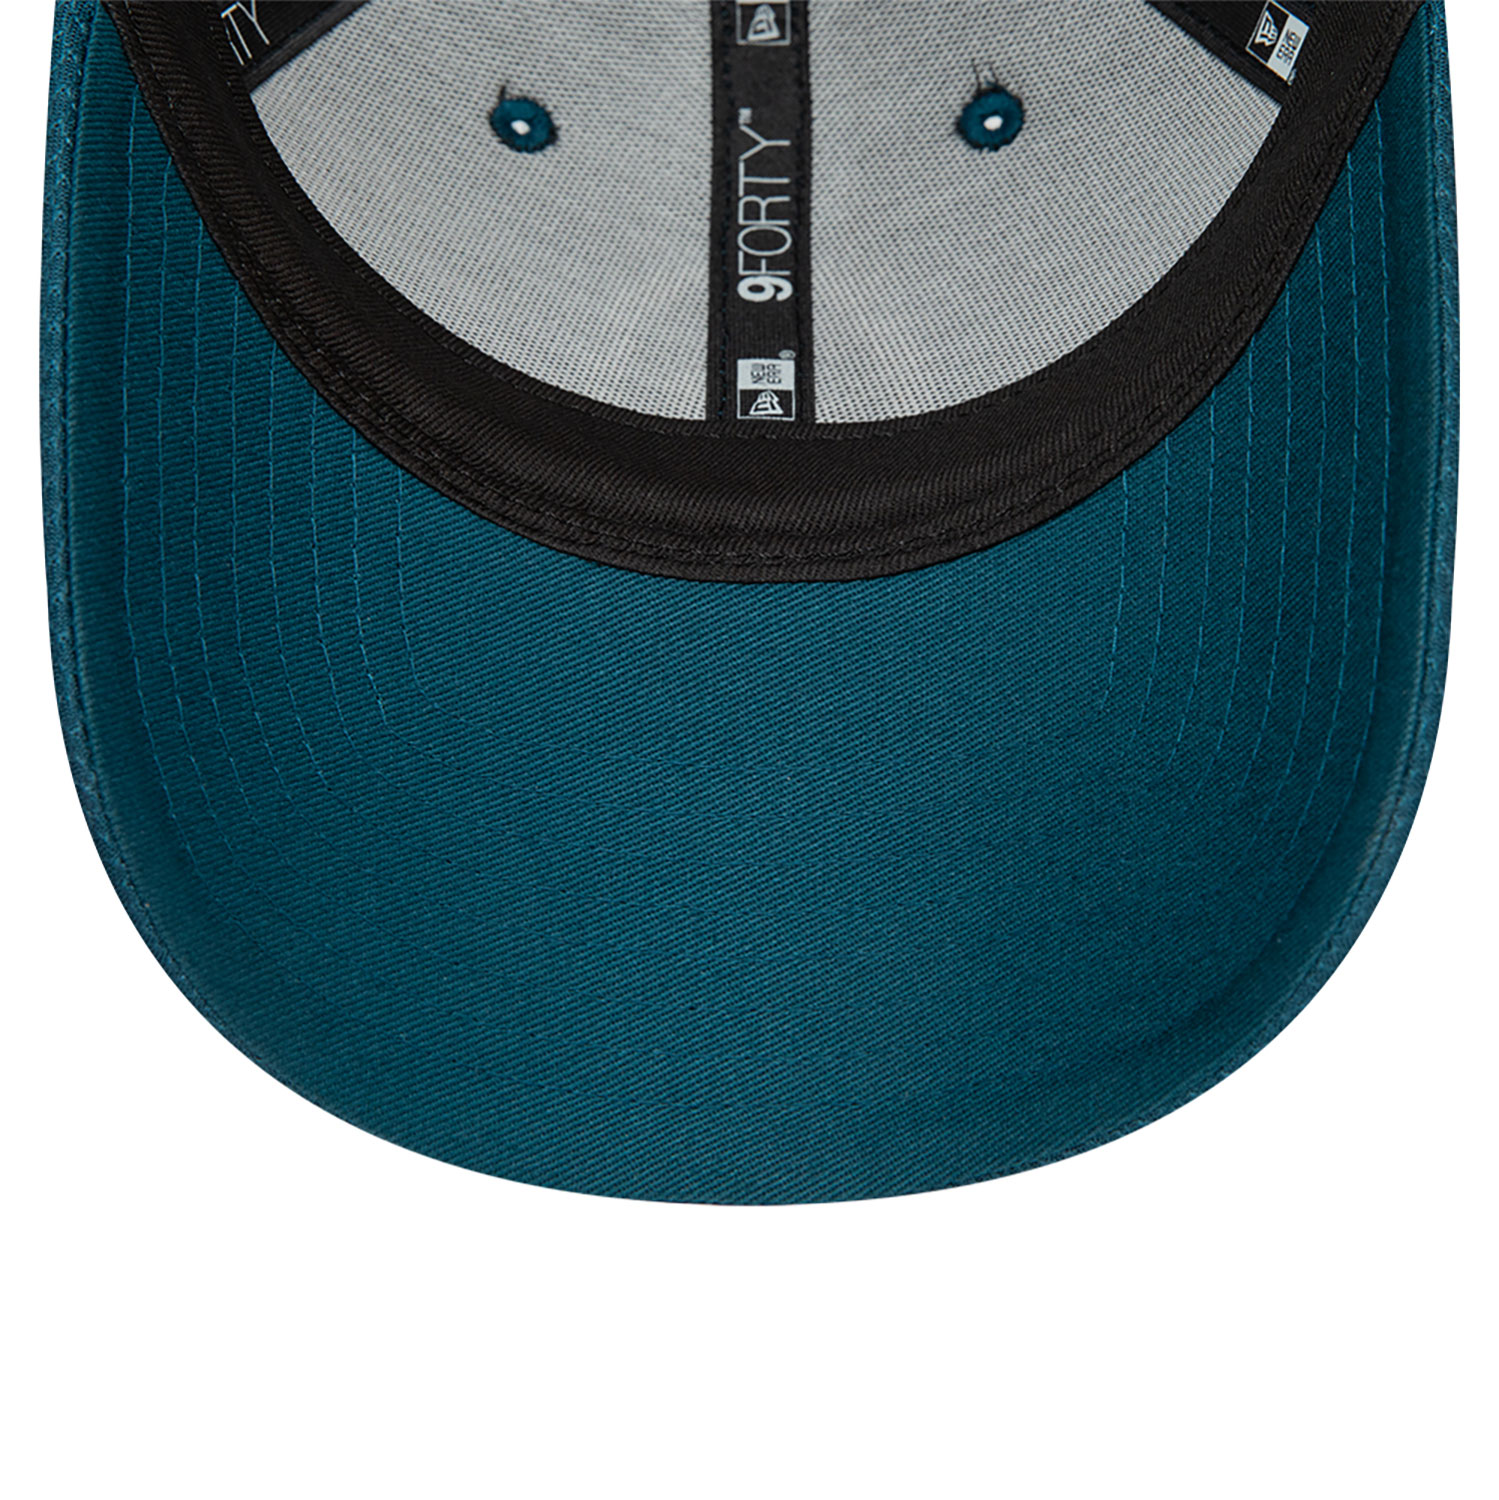 Casquette 9FORTY Oval Invincibles The Hundred